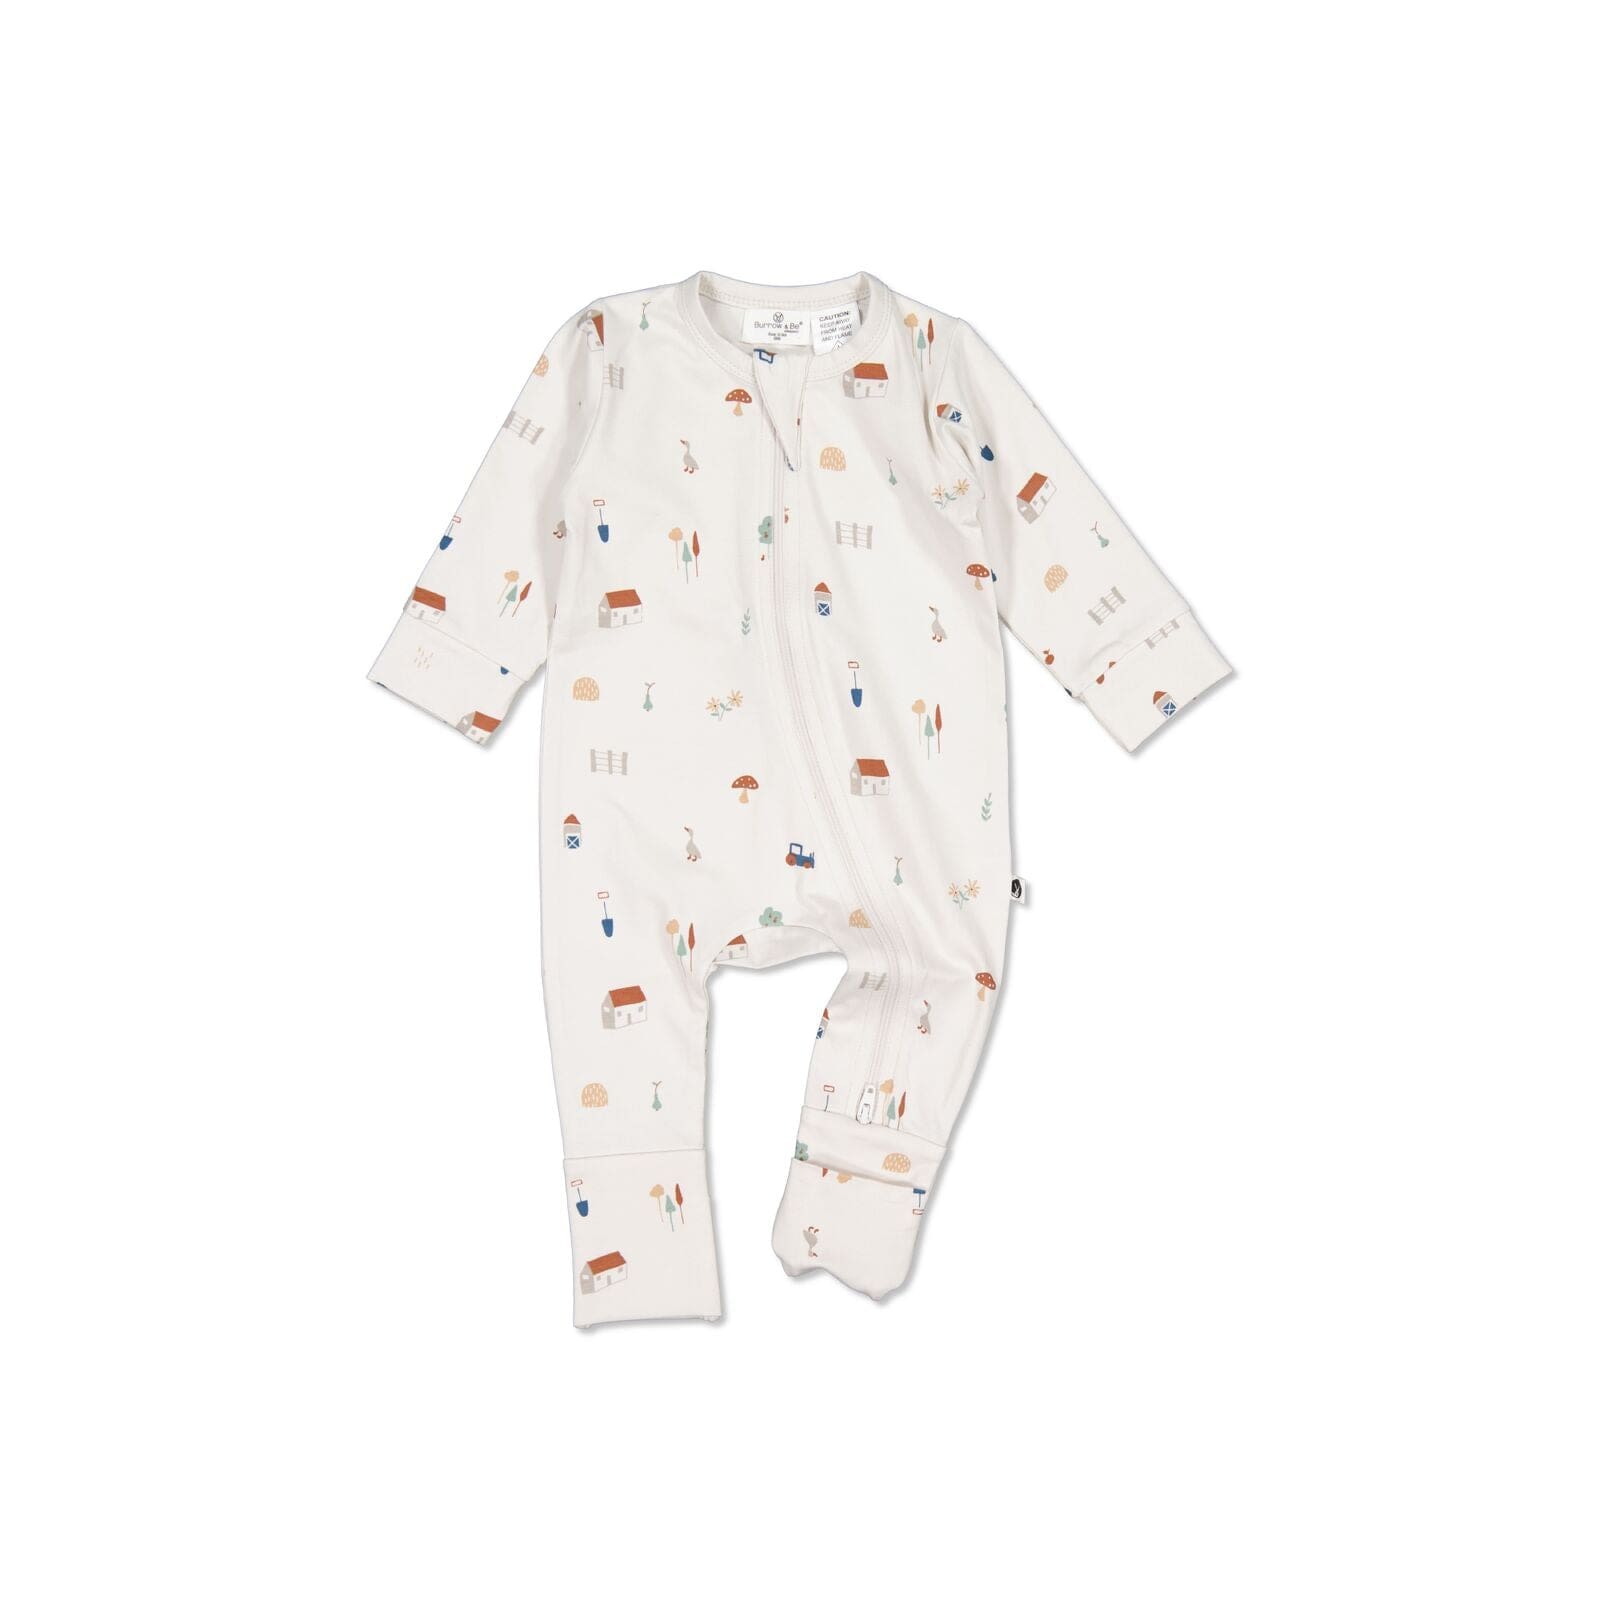 Burrow & Be Boys All In Ones Simple Life Zipsuit